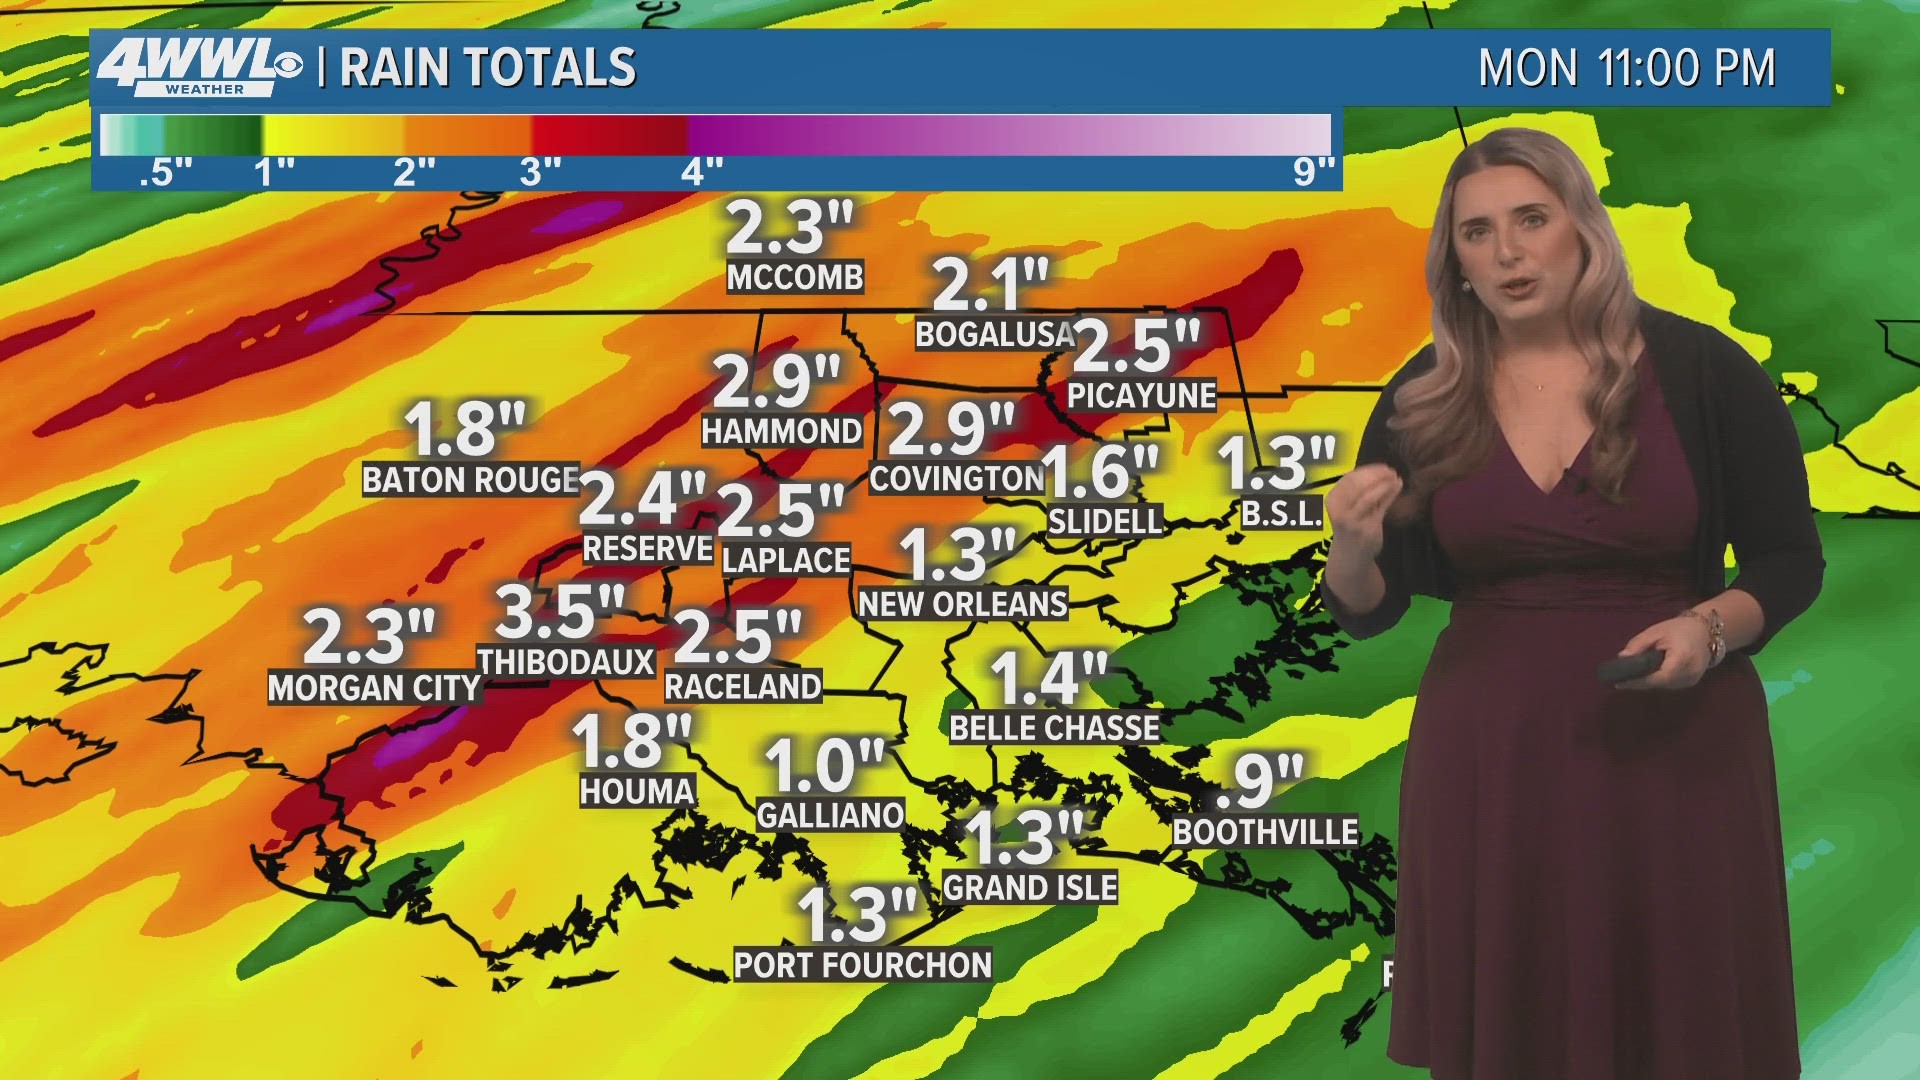 Meteorologist Alexa Trischler says severe weather and street flooding are possible Monday.